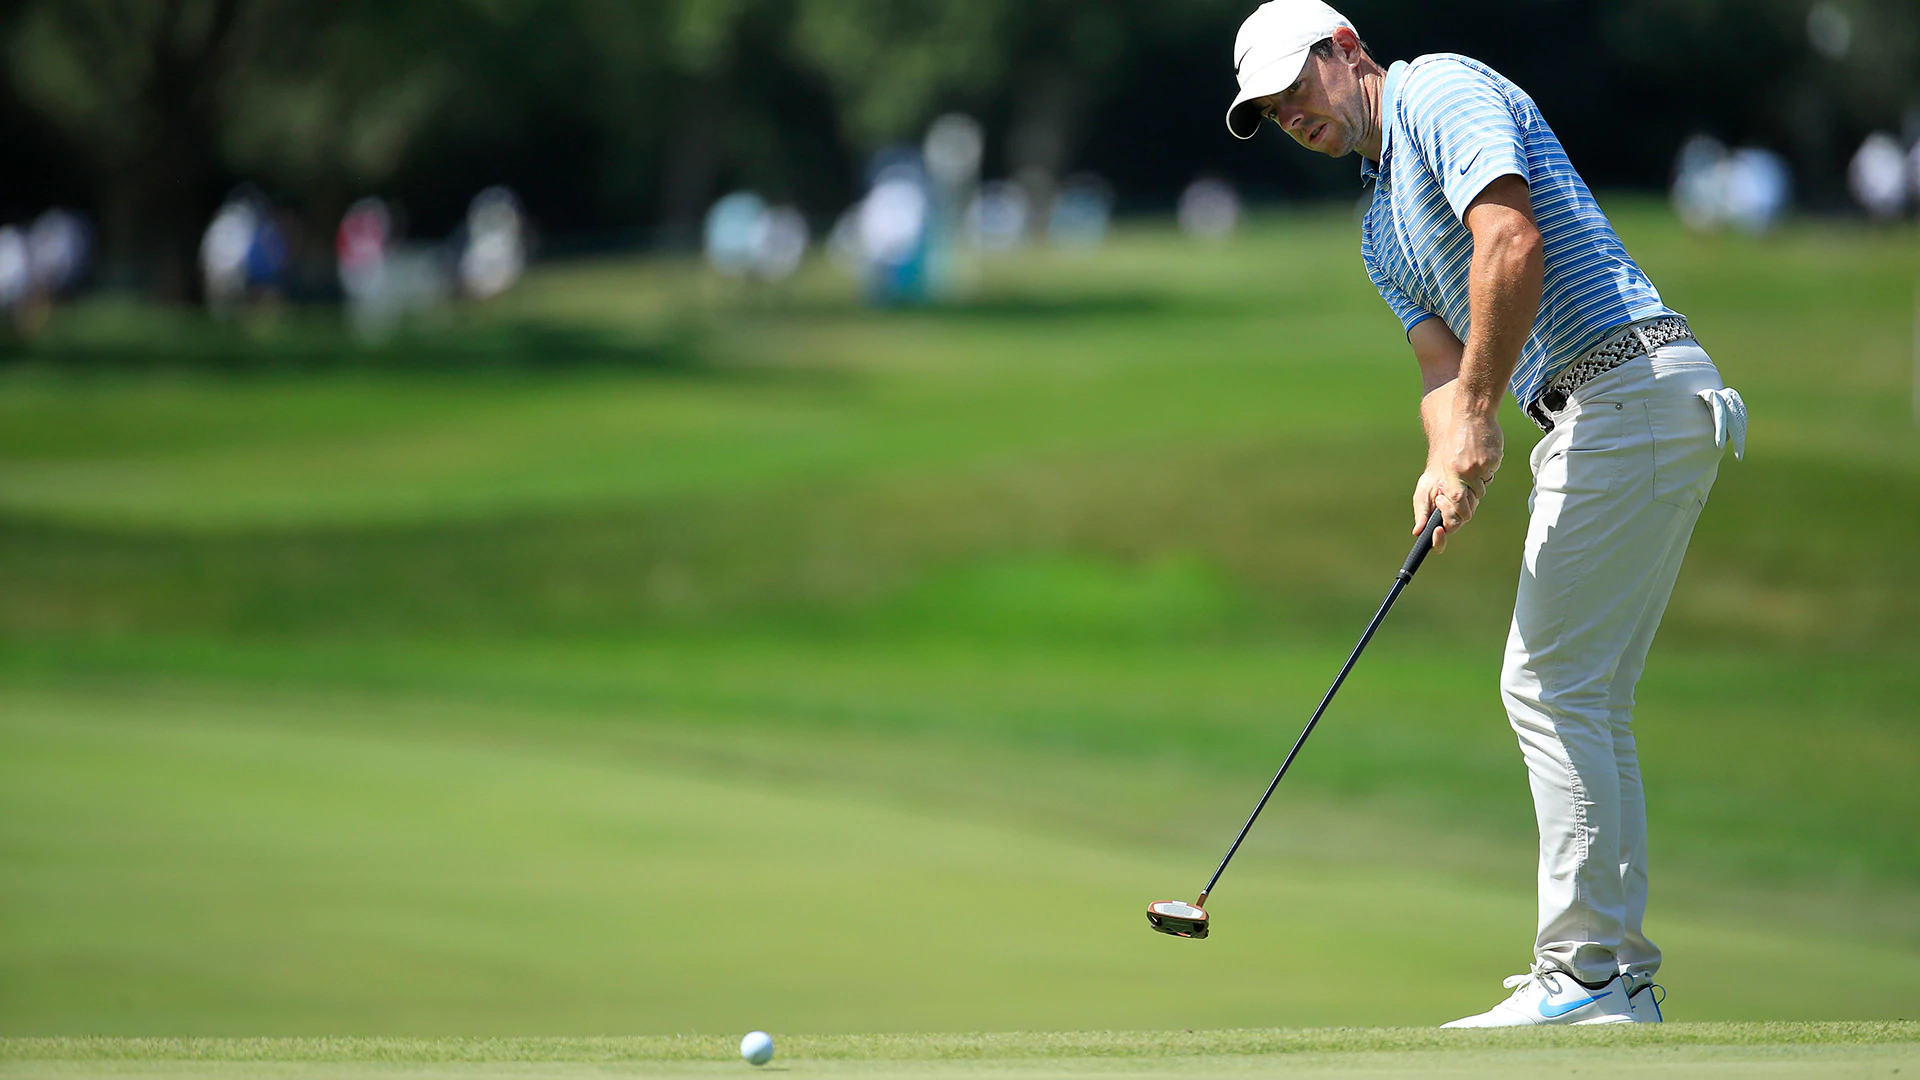 Rory McIlroy swapped putters after he ‘yipped one’ on Thursday